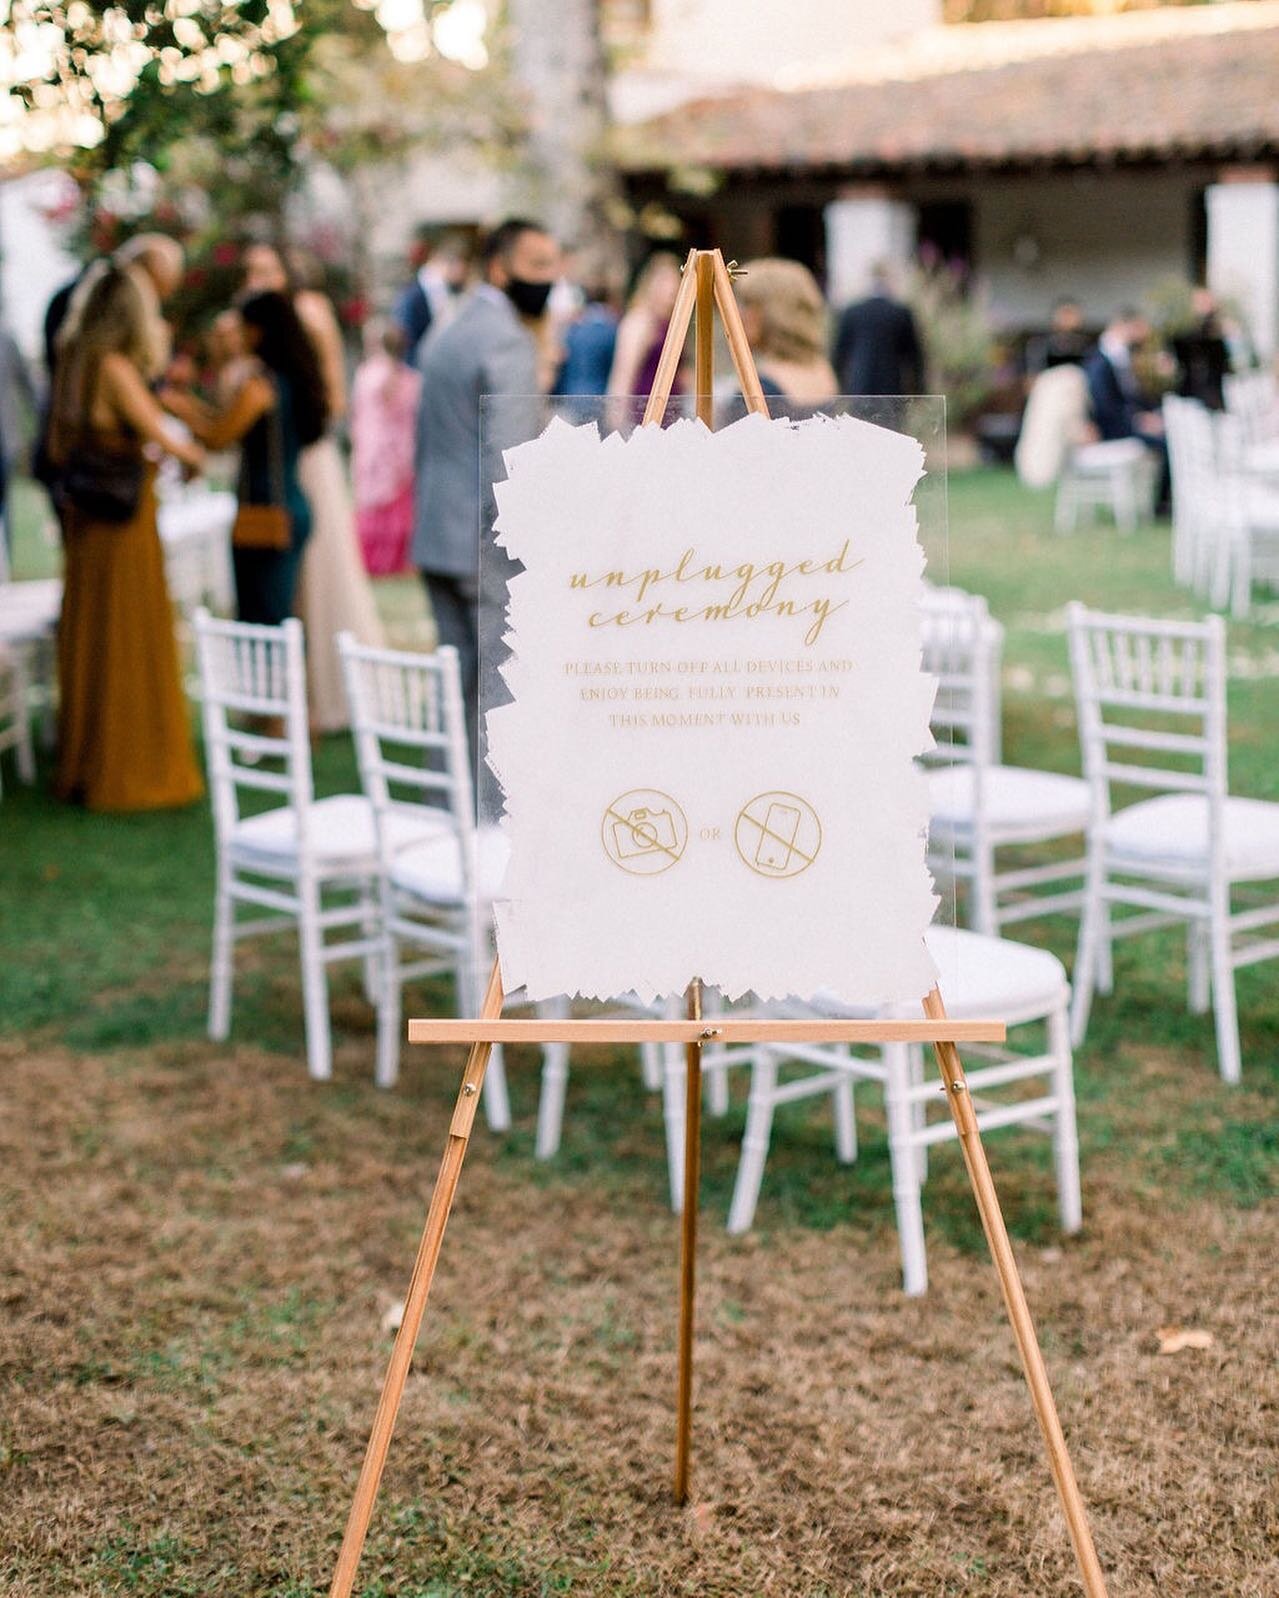 unplugged ceremony
⠀⠀⠀⠀⠀⠀⠀⠀⠀
a time when all your friends + family can be fully present in the moment. the moment in which you commit yourself to the love of your life in front of your dearest people.
⠀⠀⠀⠀⠀⠀⠀⠀⠀
your wedding should be exactly as you w